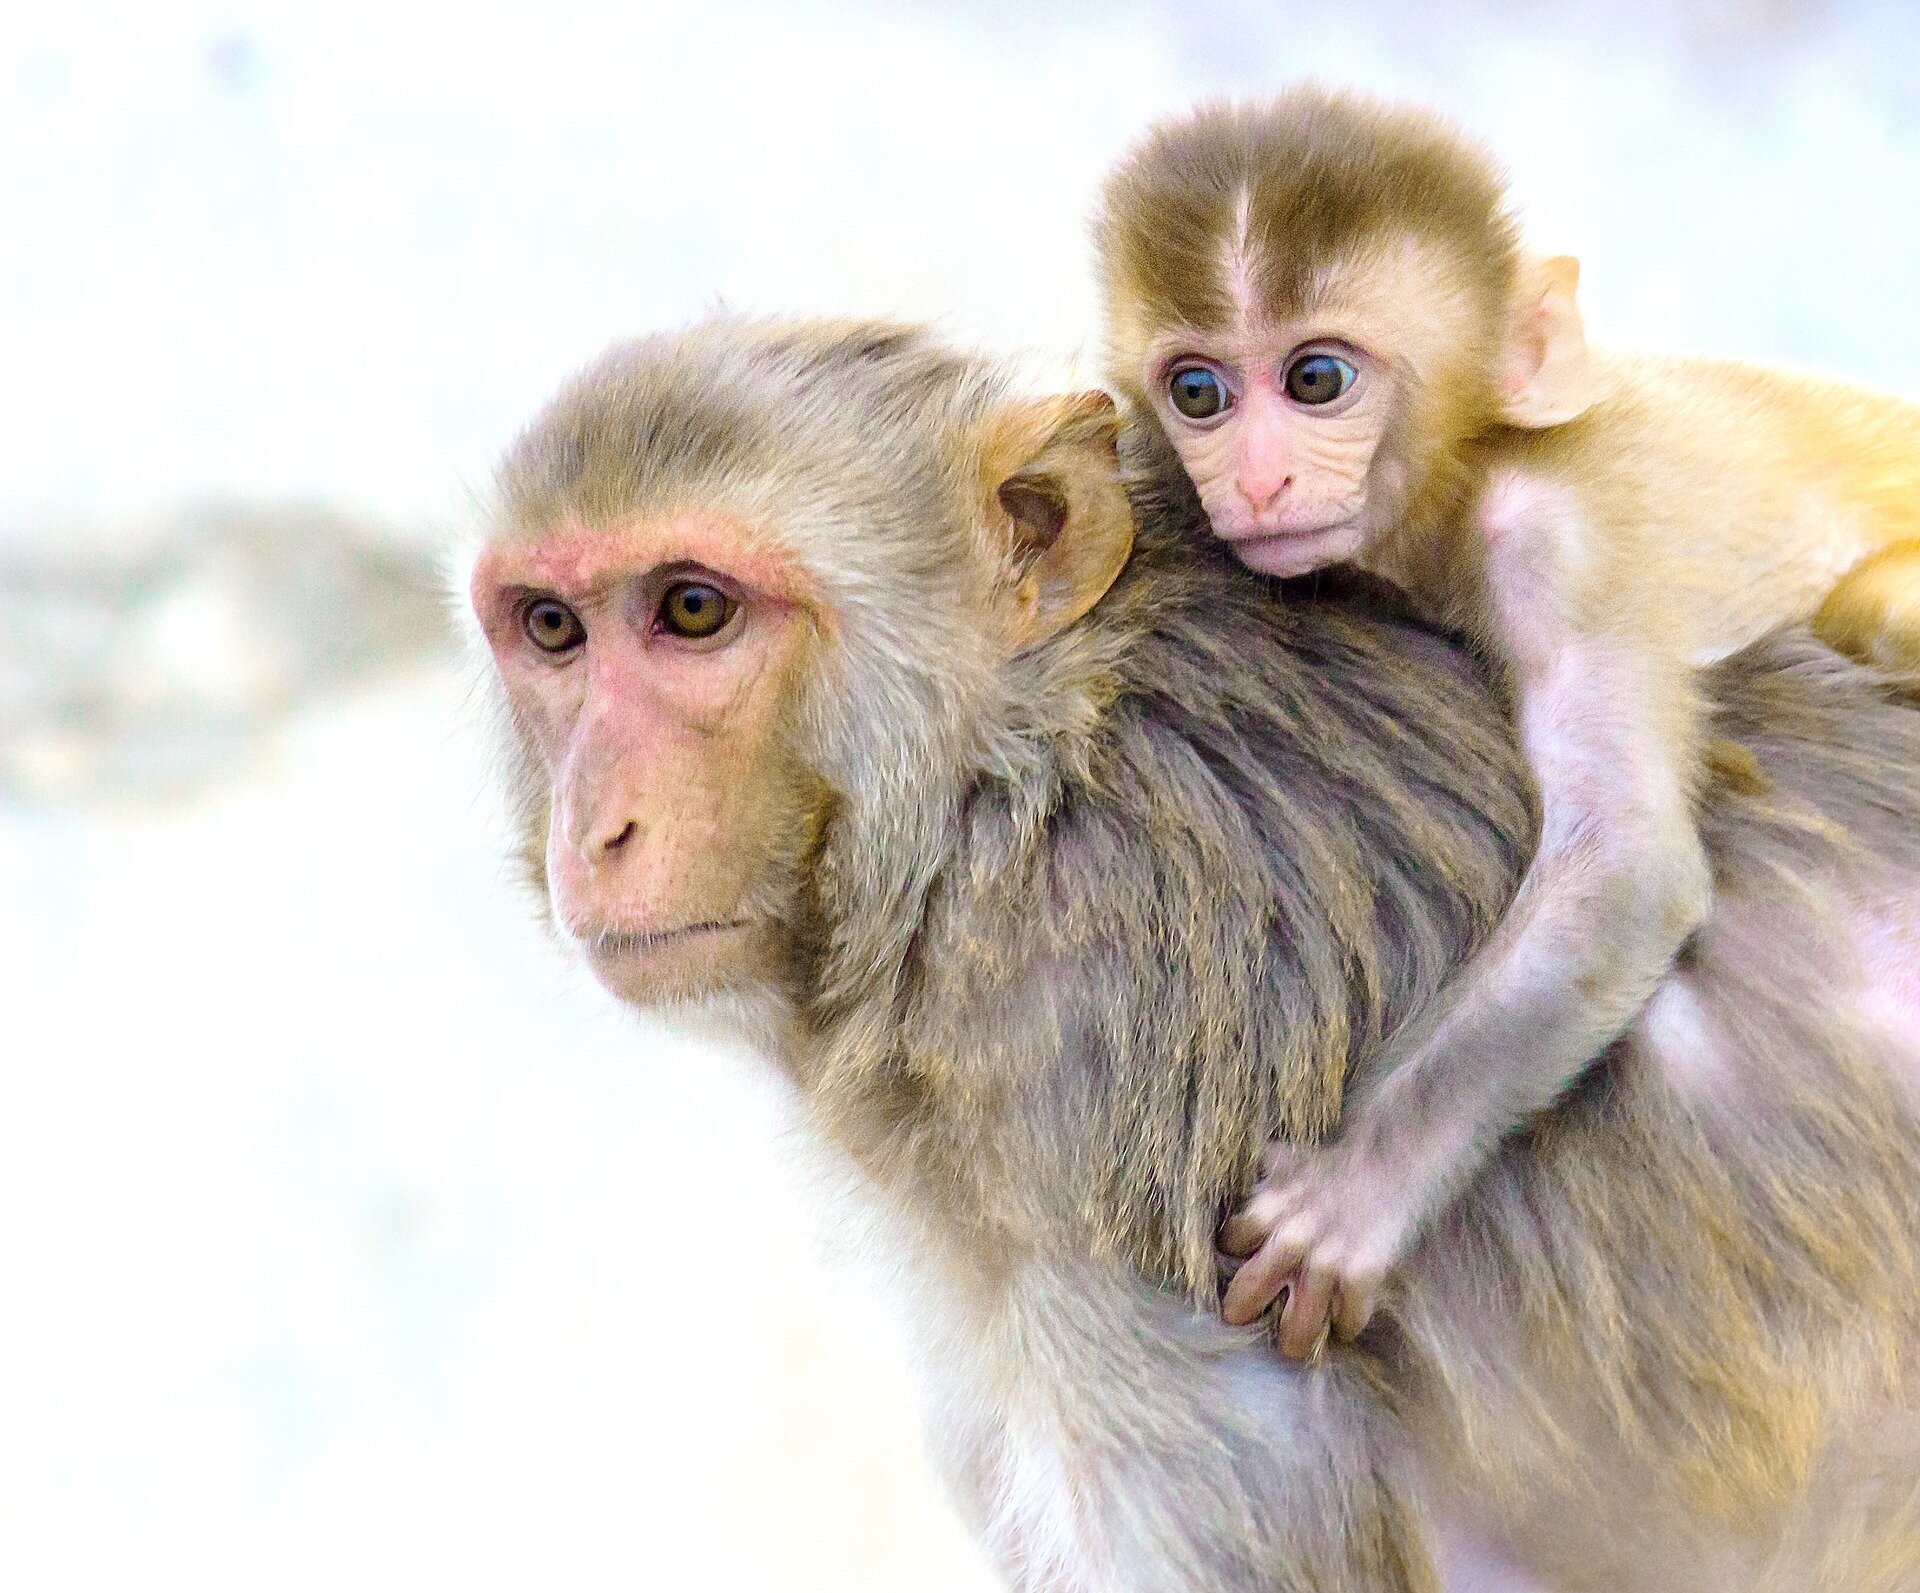 Research uncovers the neural pathways for primate reciprocity, social support, and empathy